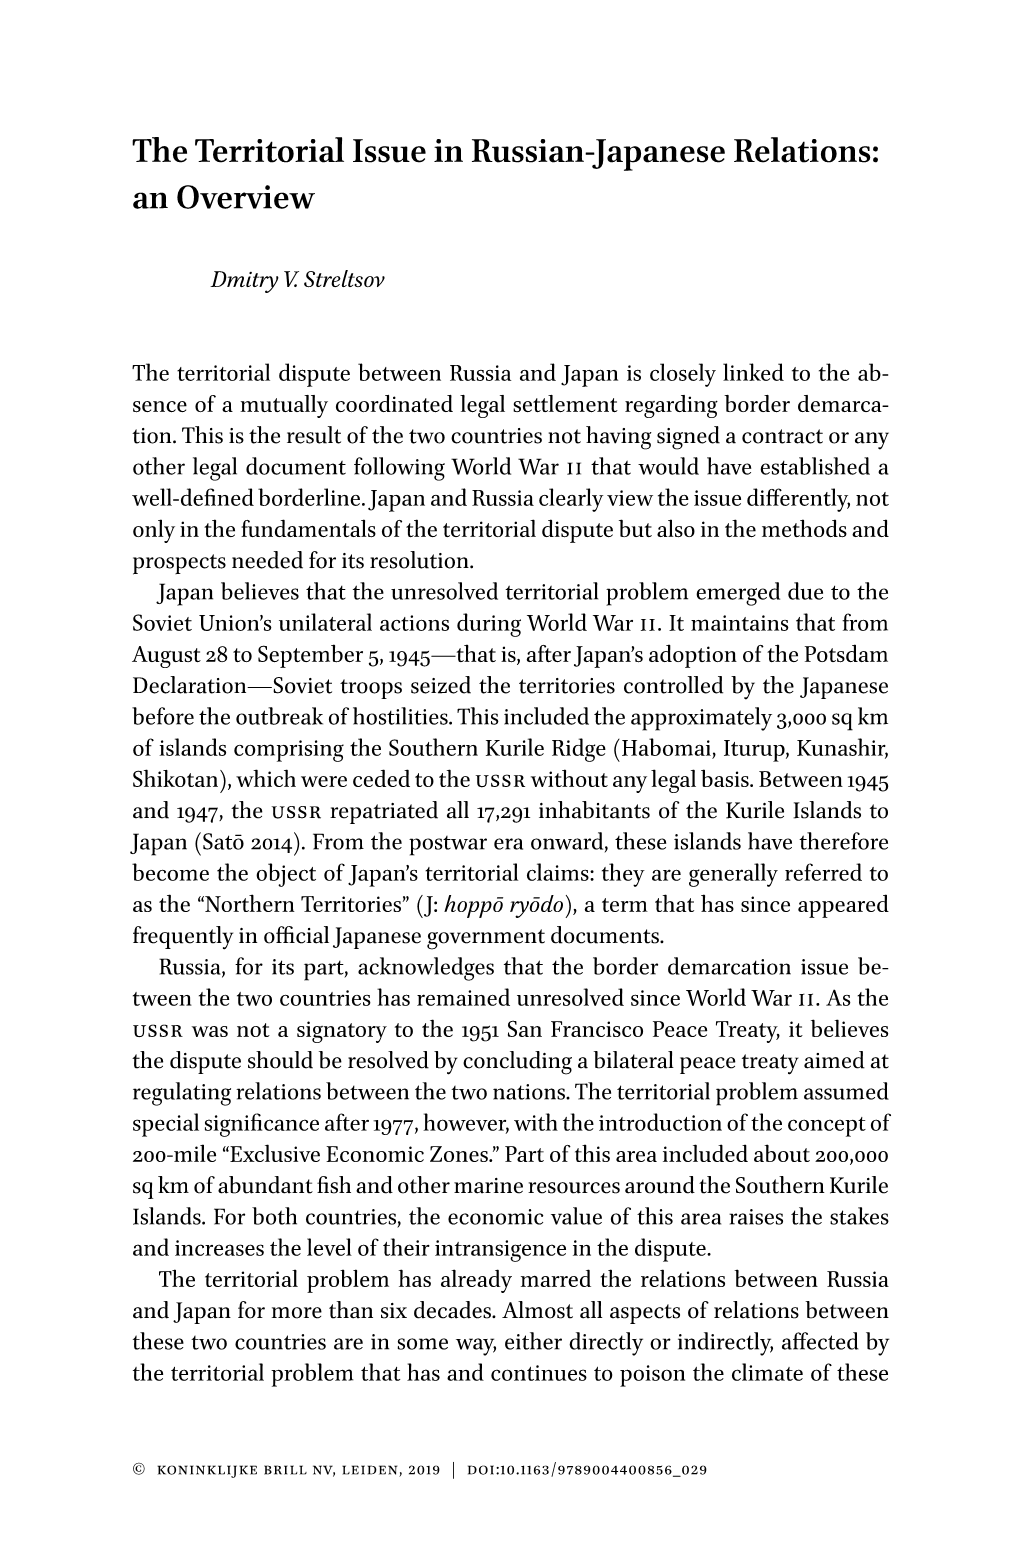 The Territorial Issue in Russian-Japanese Relations: an Overview